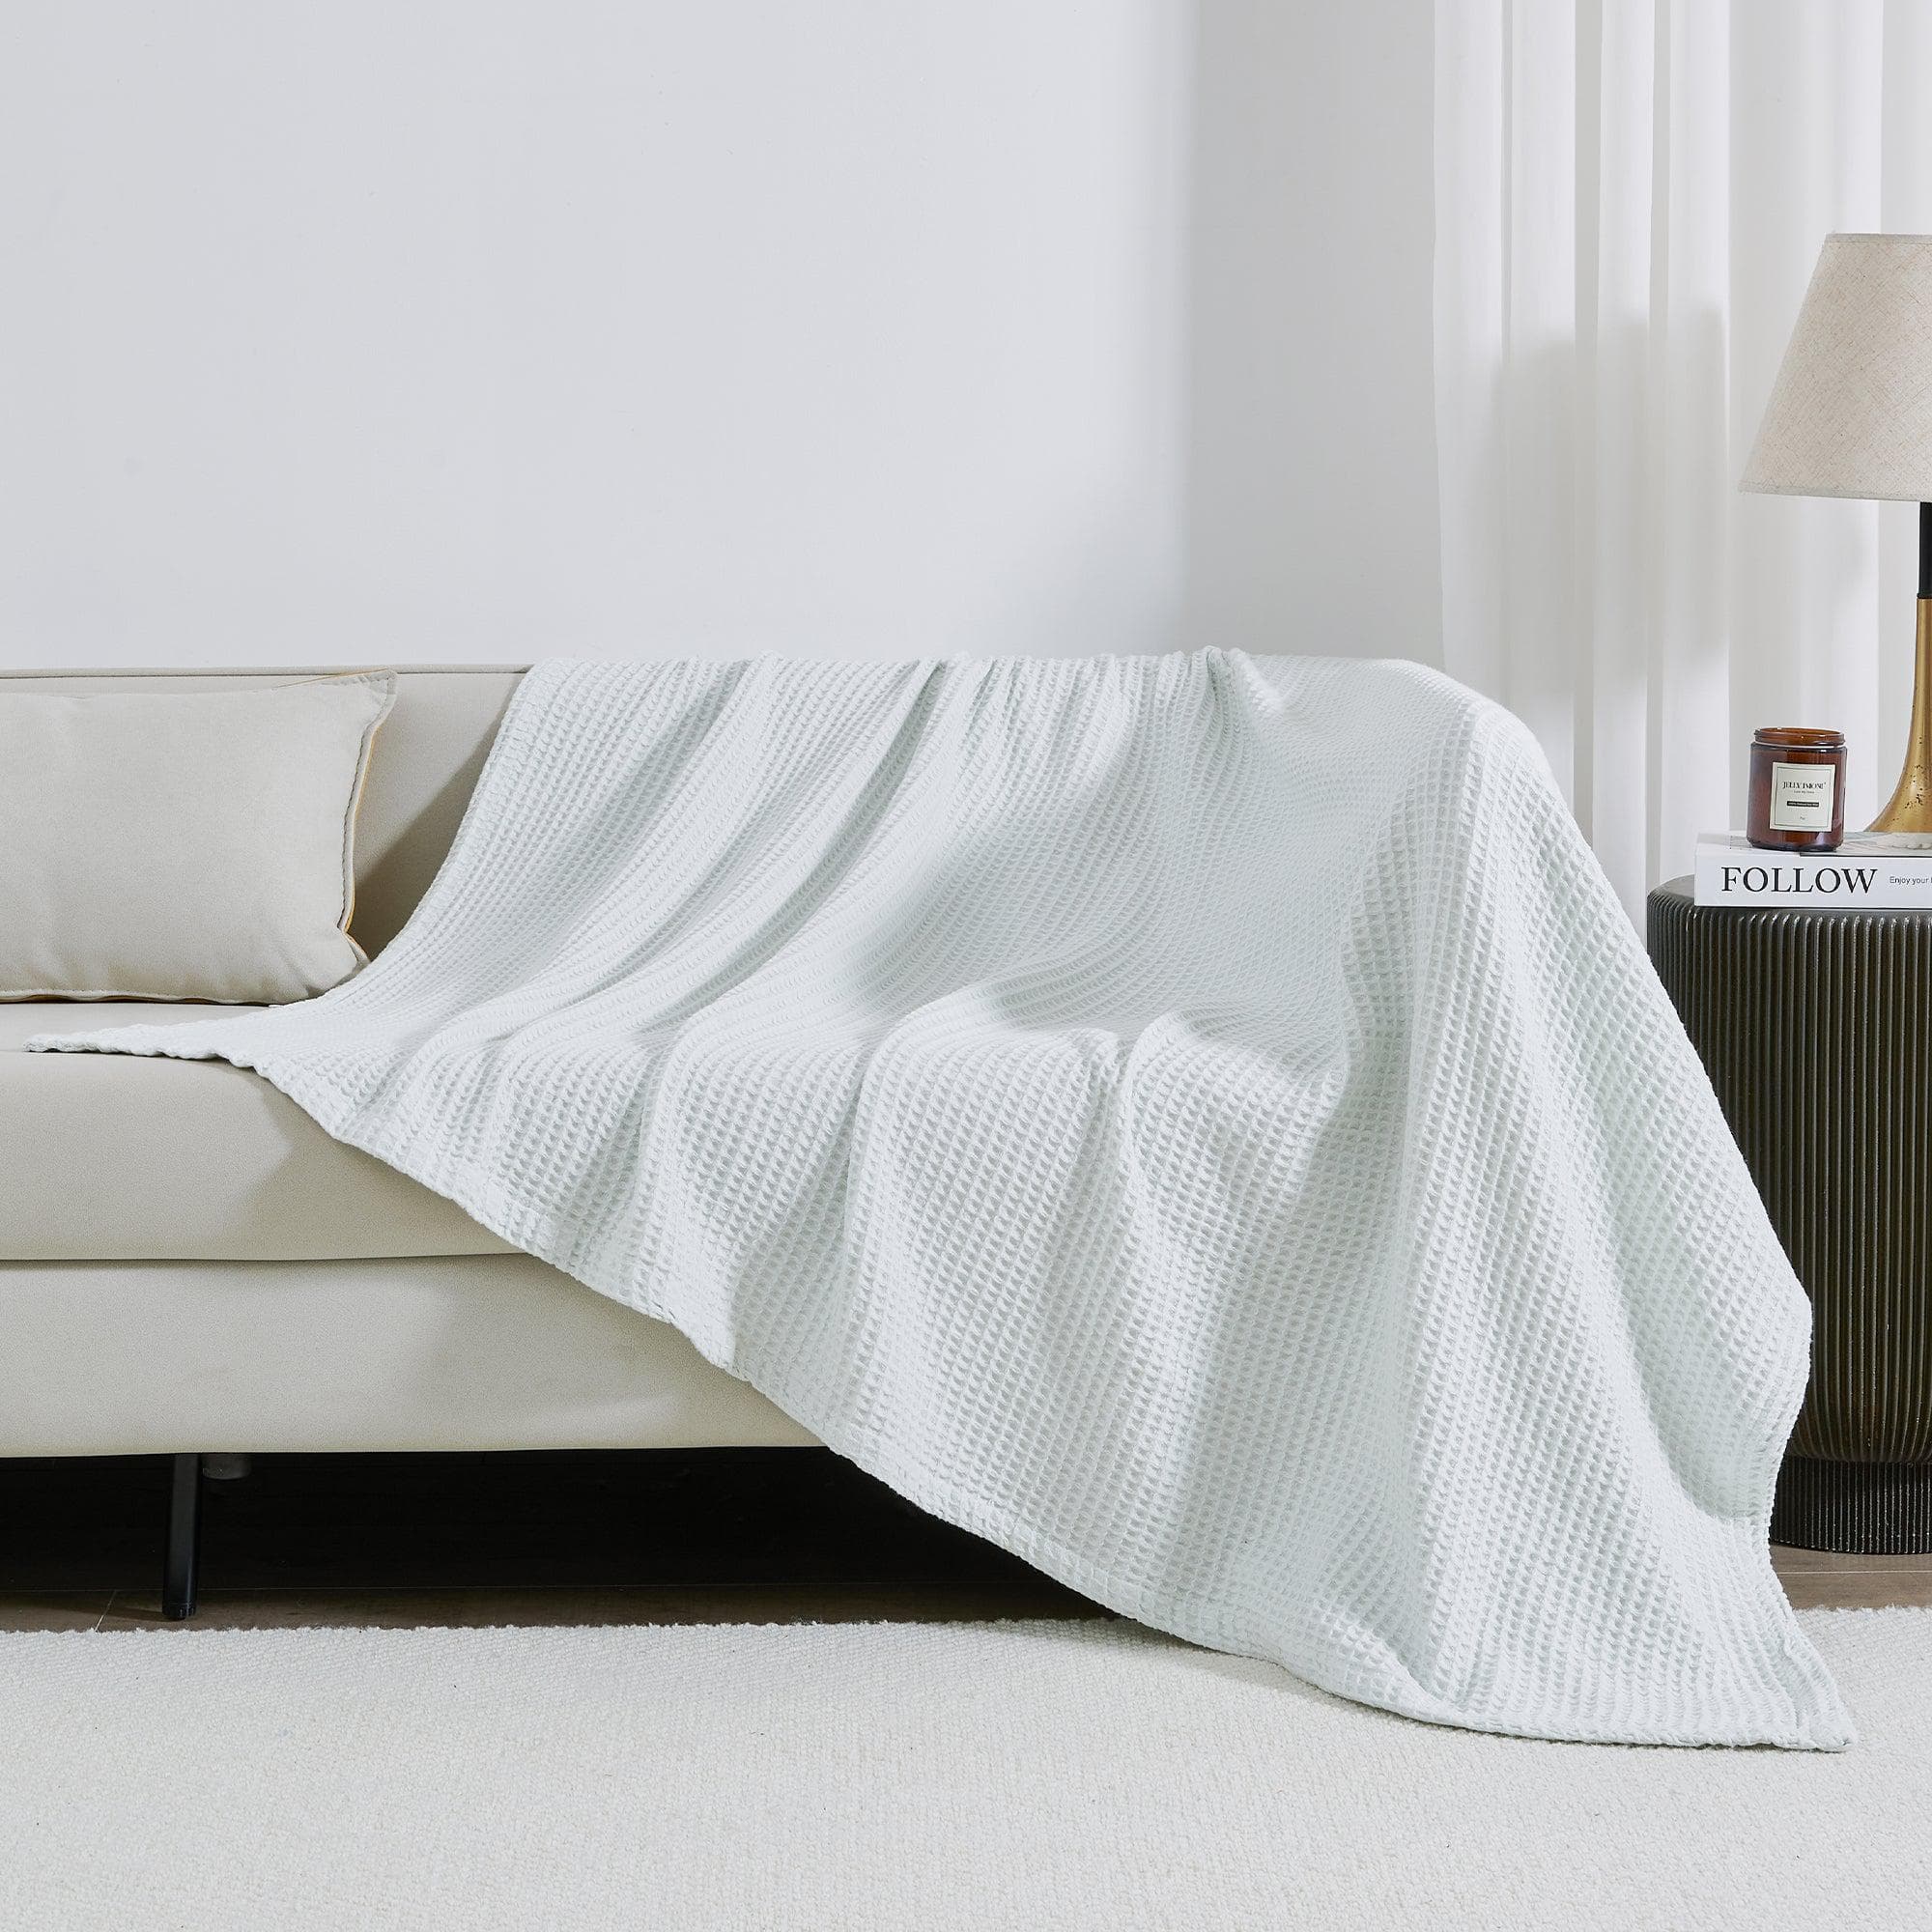 100% Cotton Waffle Weave Blanket  Mikala Collection by Great Bay Home